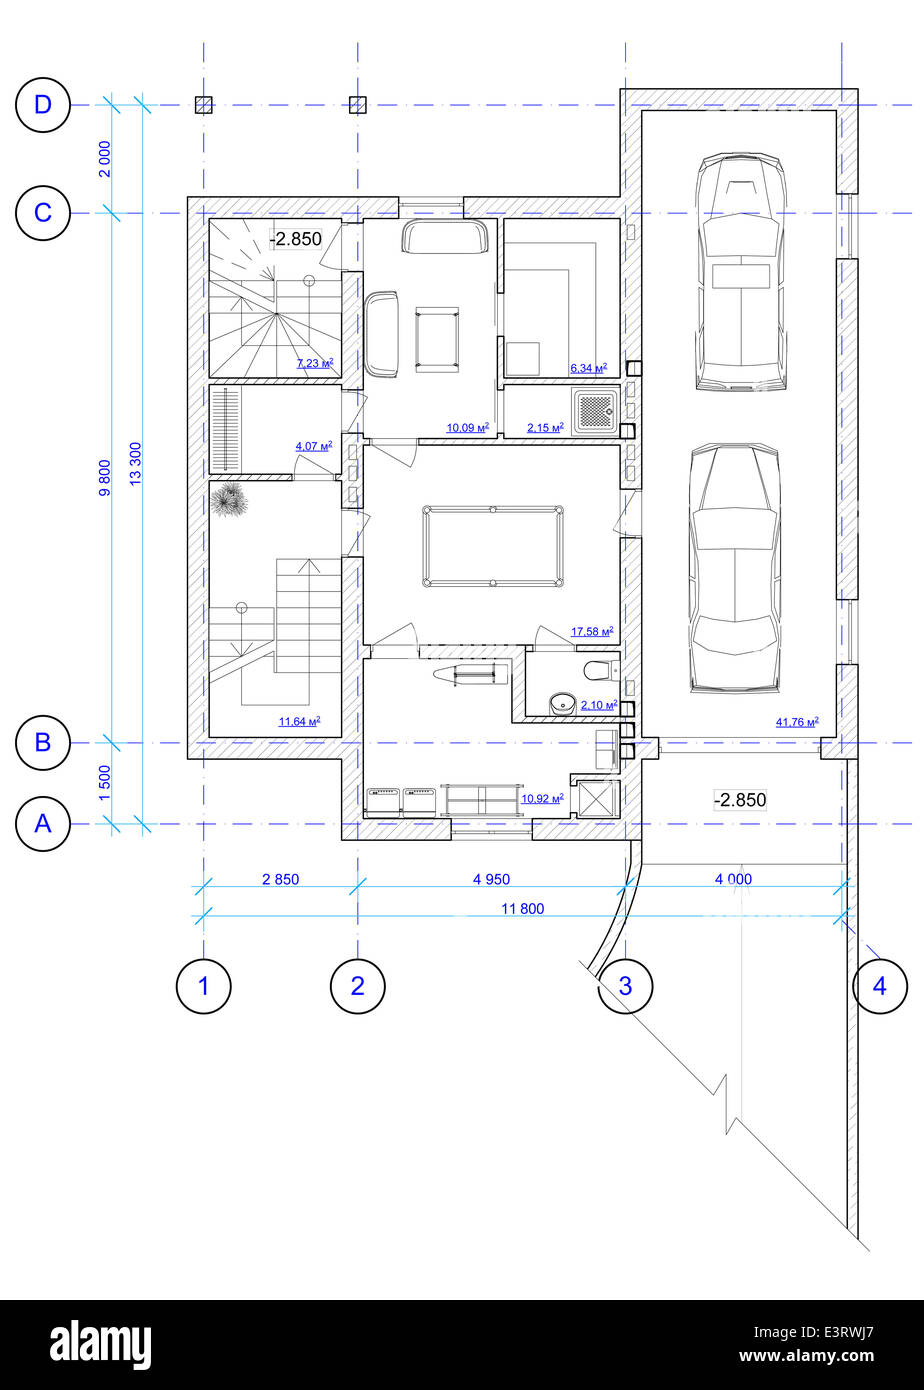 Architectural plan of 0 floor of house Stock Photo